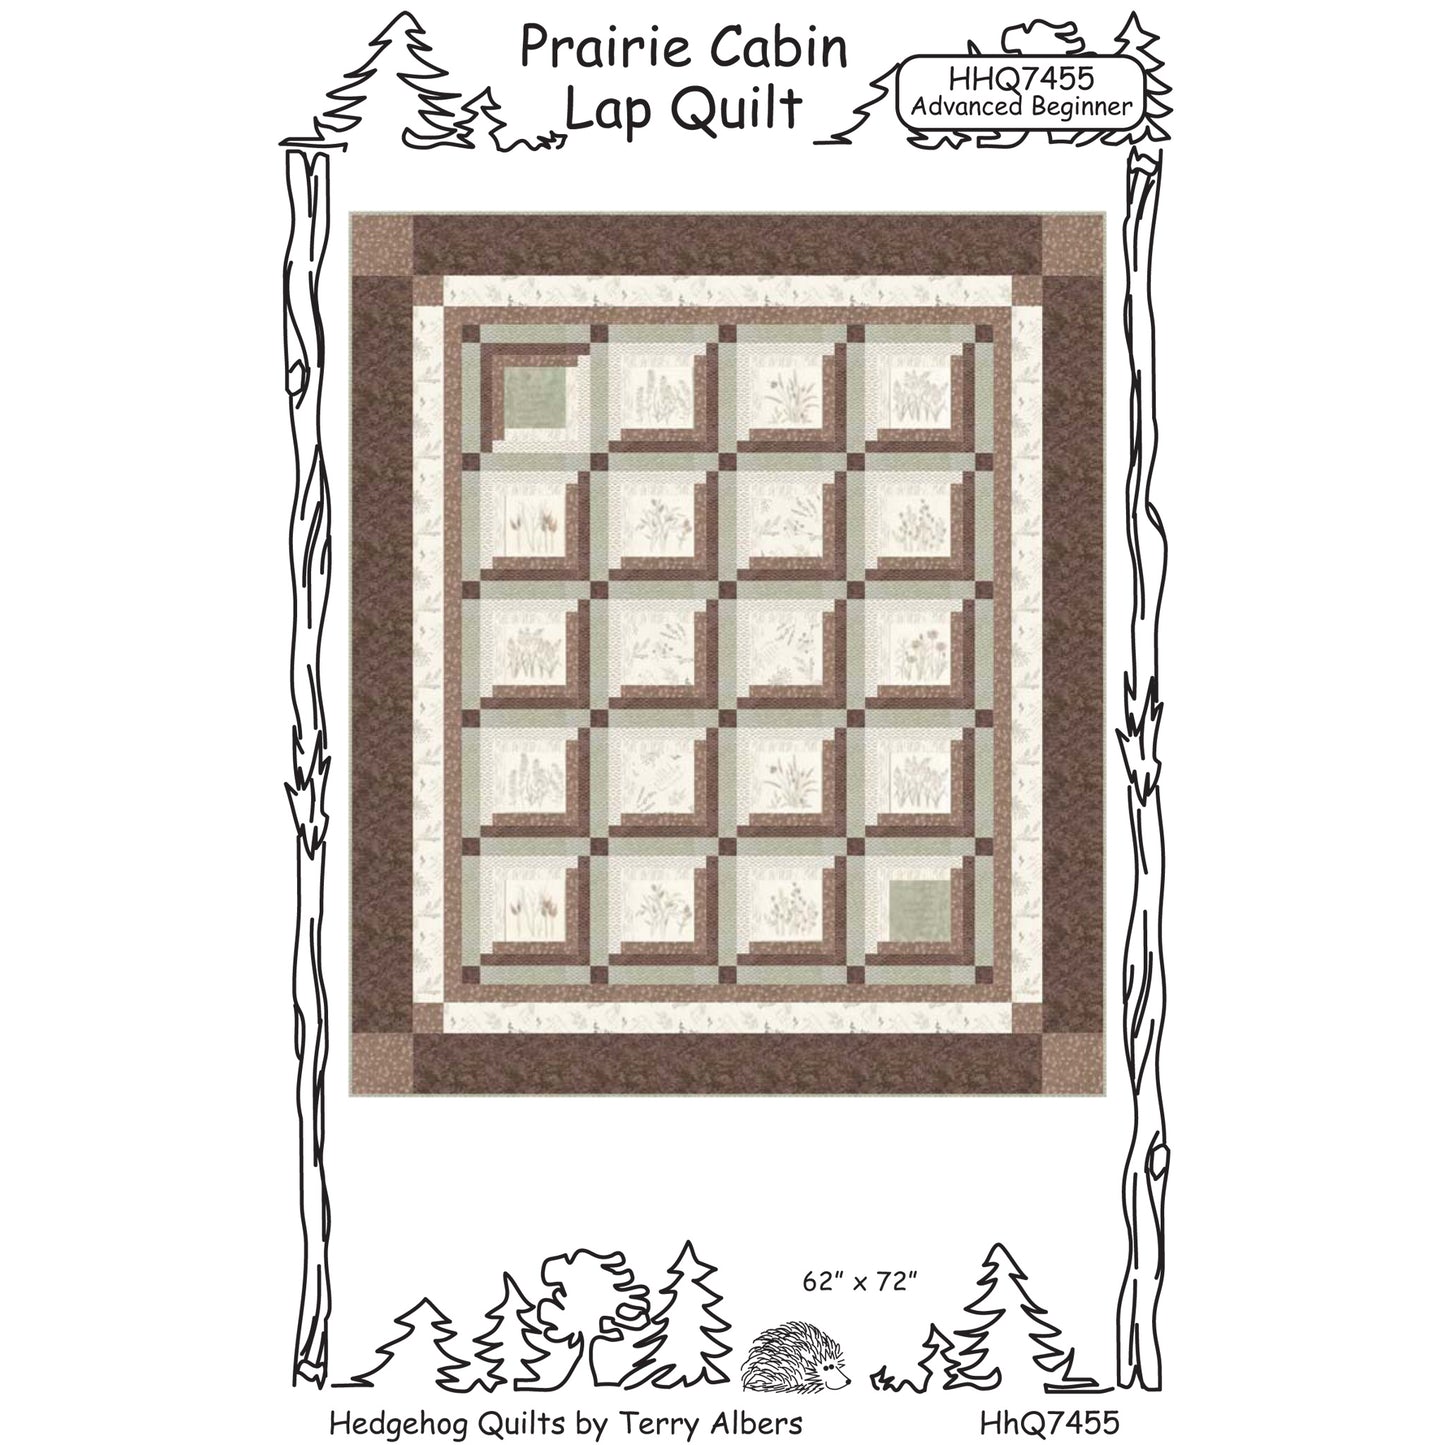 Cover image of pattern for Prairie Cabin Lap Quilt.